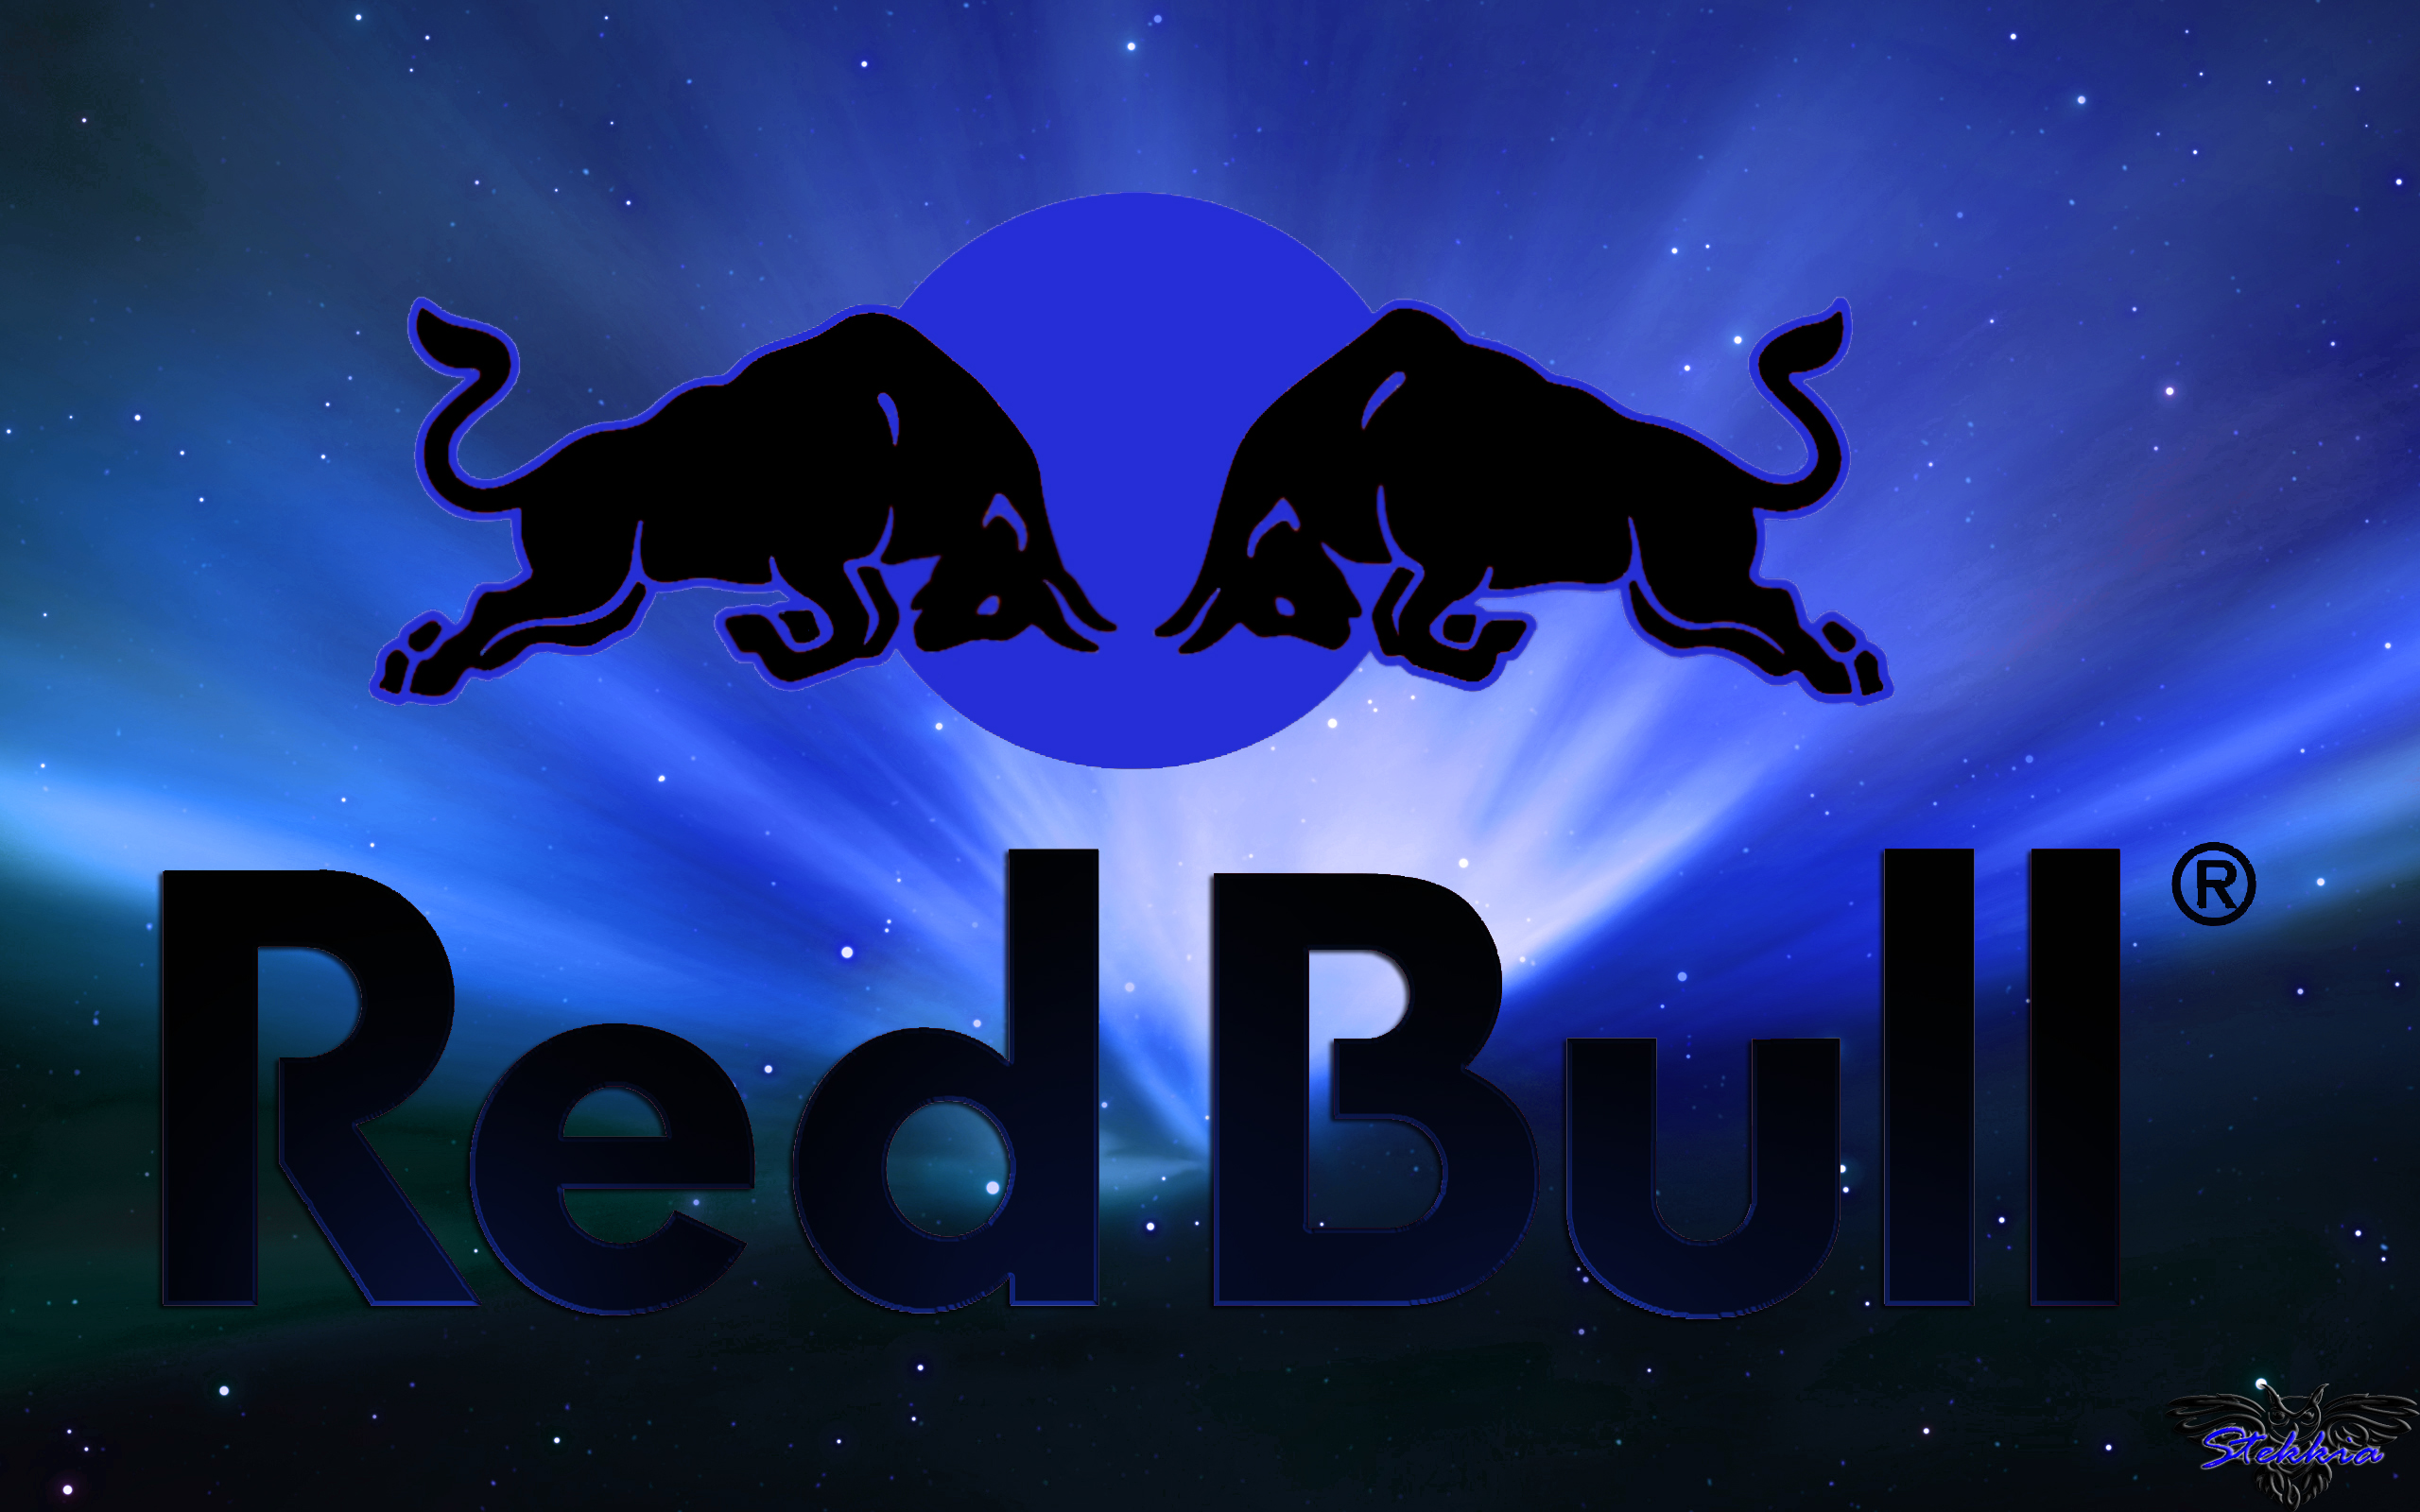 Free Download Red Bull Desktop And Mobile Wallpaper Wallippo 2560x1600 For Your Desktop Mobile Tablet Explore 49 Red Bull Wallpapers Red Bull Backgrounds Red Bull Wallpapers Red Bull Wallpaper